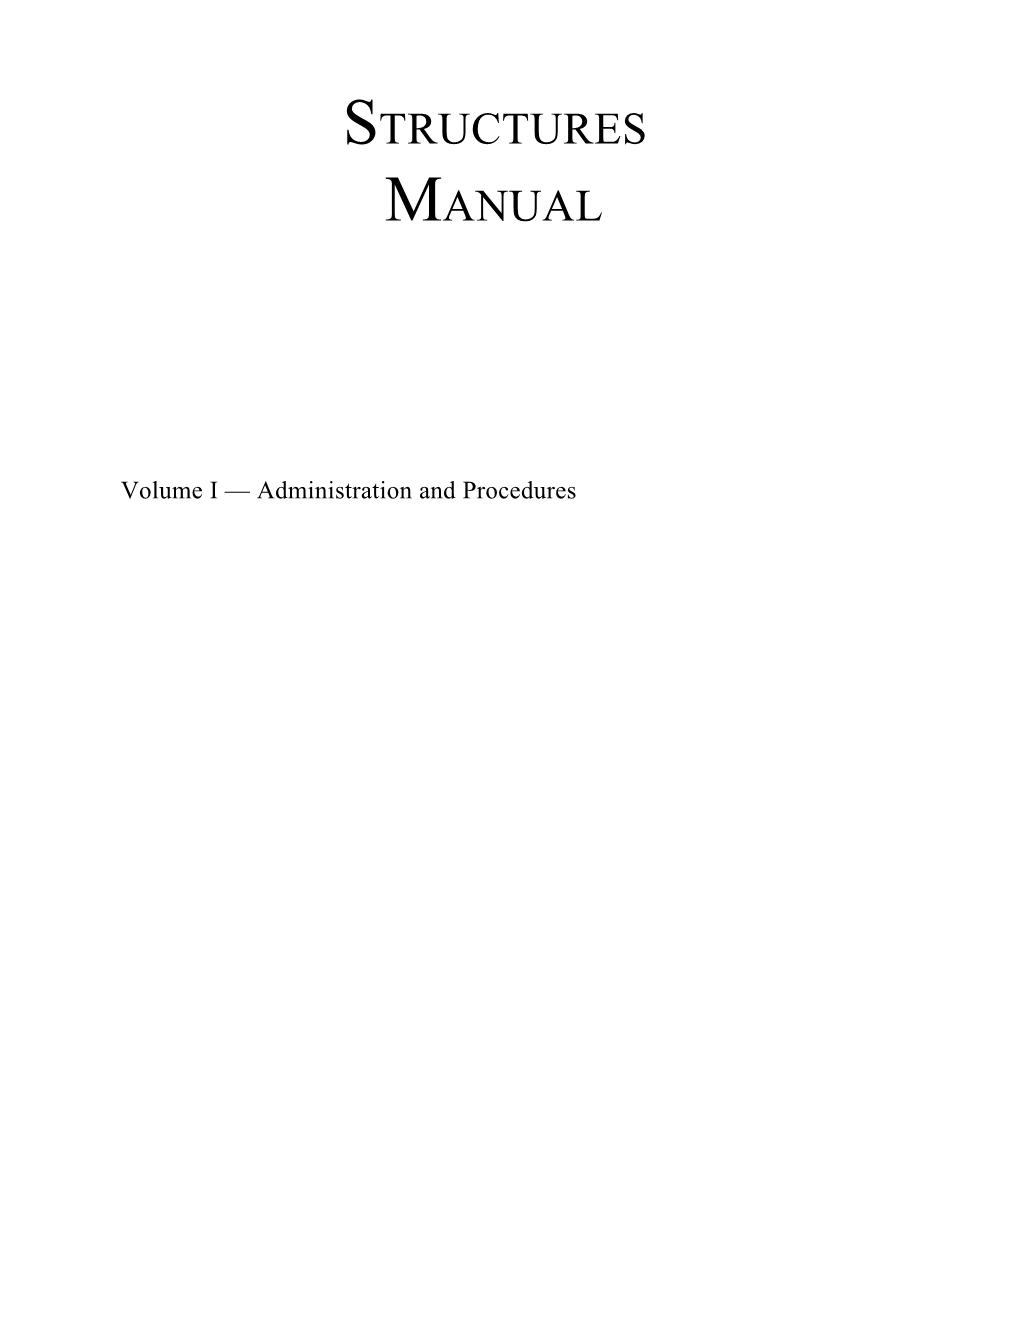 Volume I Administration and Procedures